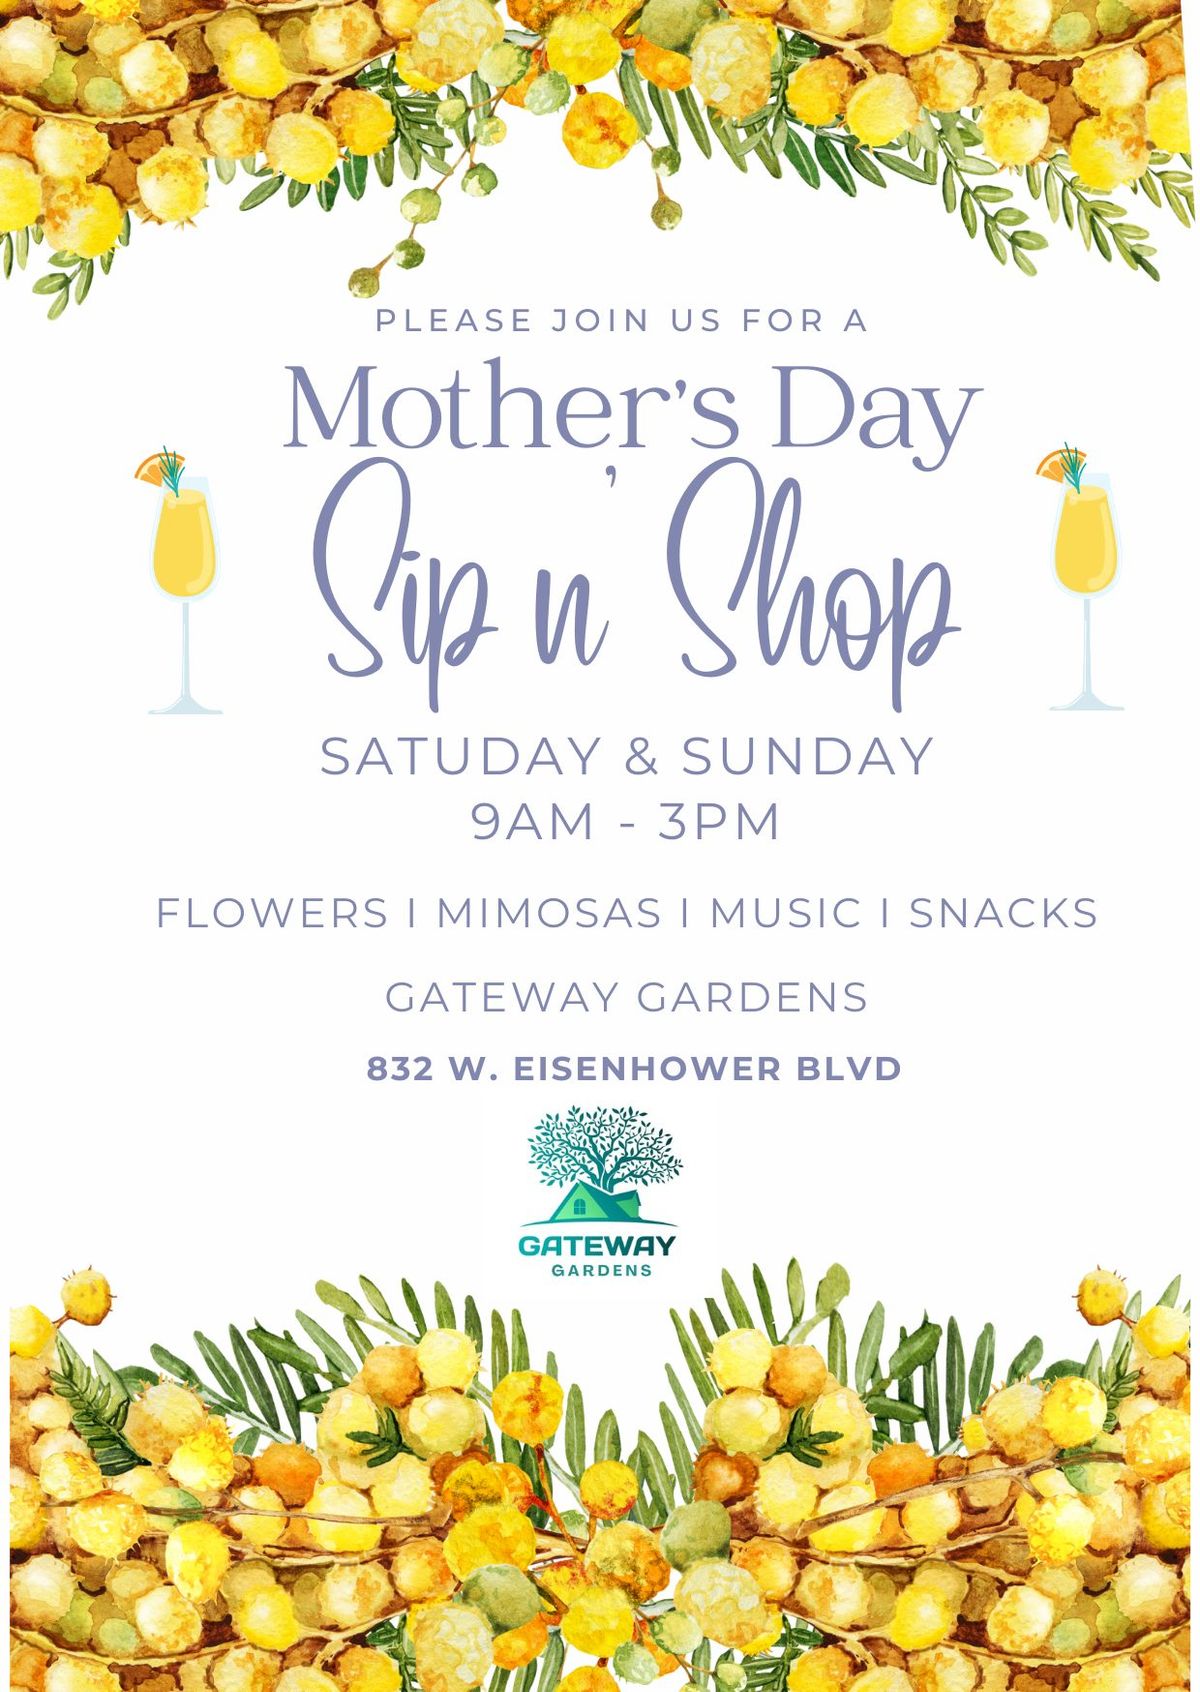 Mother's Day Weekend Sip n' Shop Event 